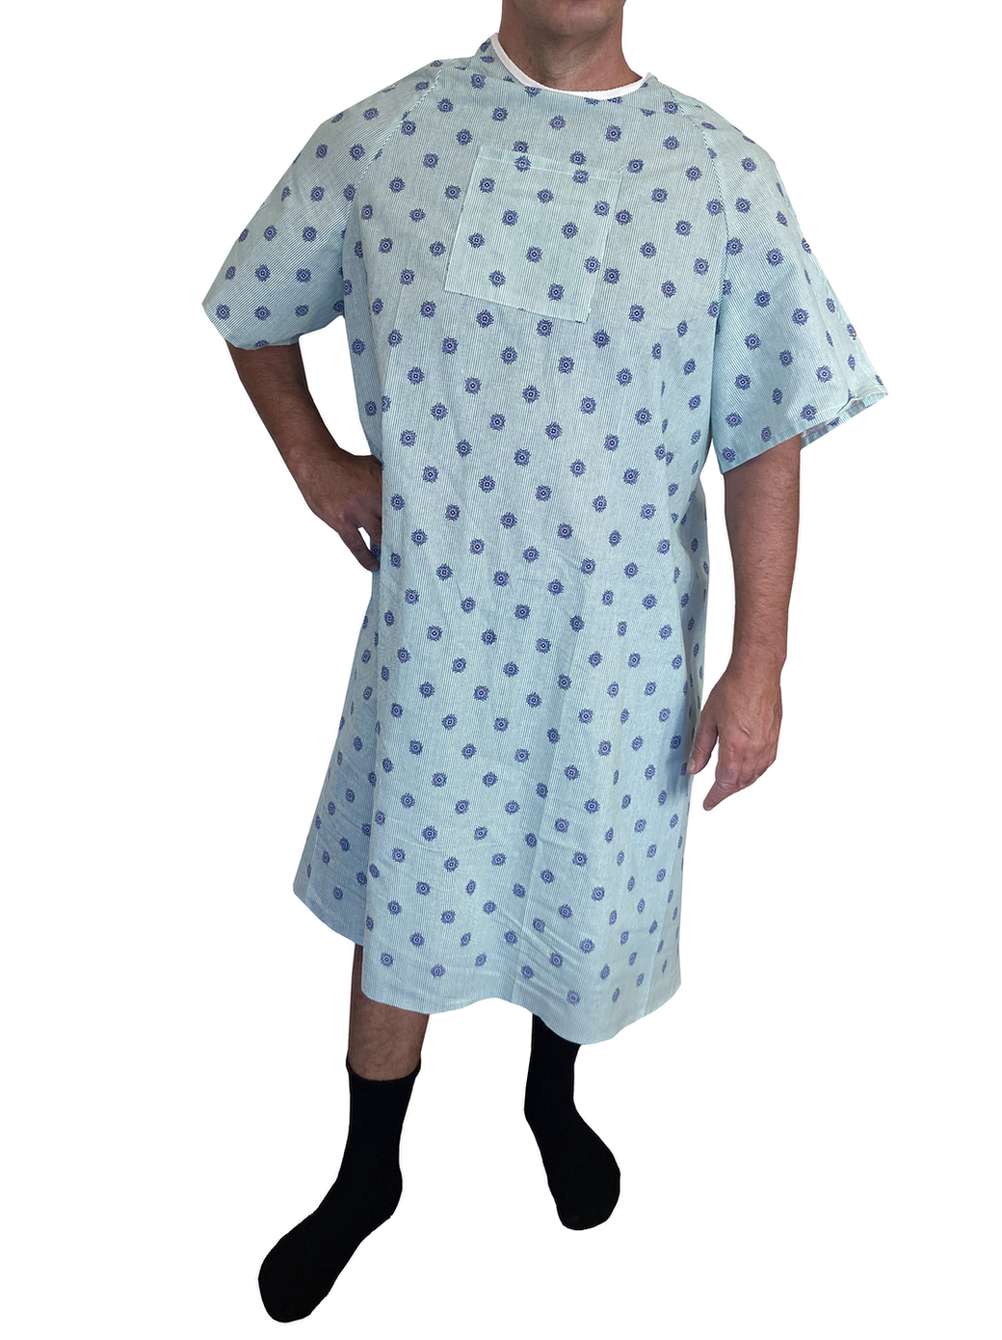 Patient-friendly hospital gowns - Specialty Fabrics Review